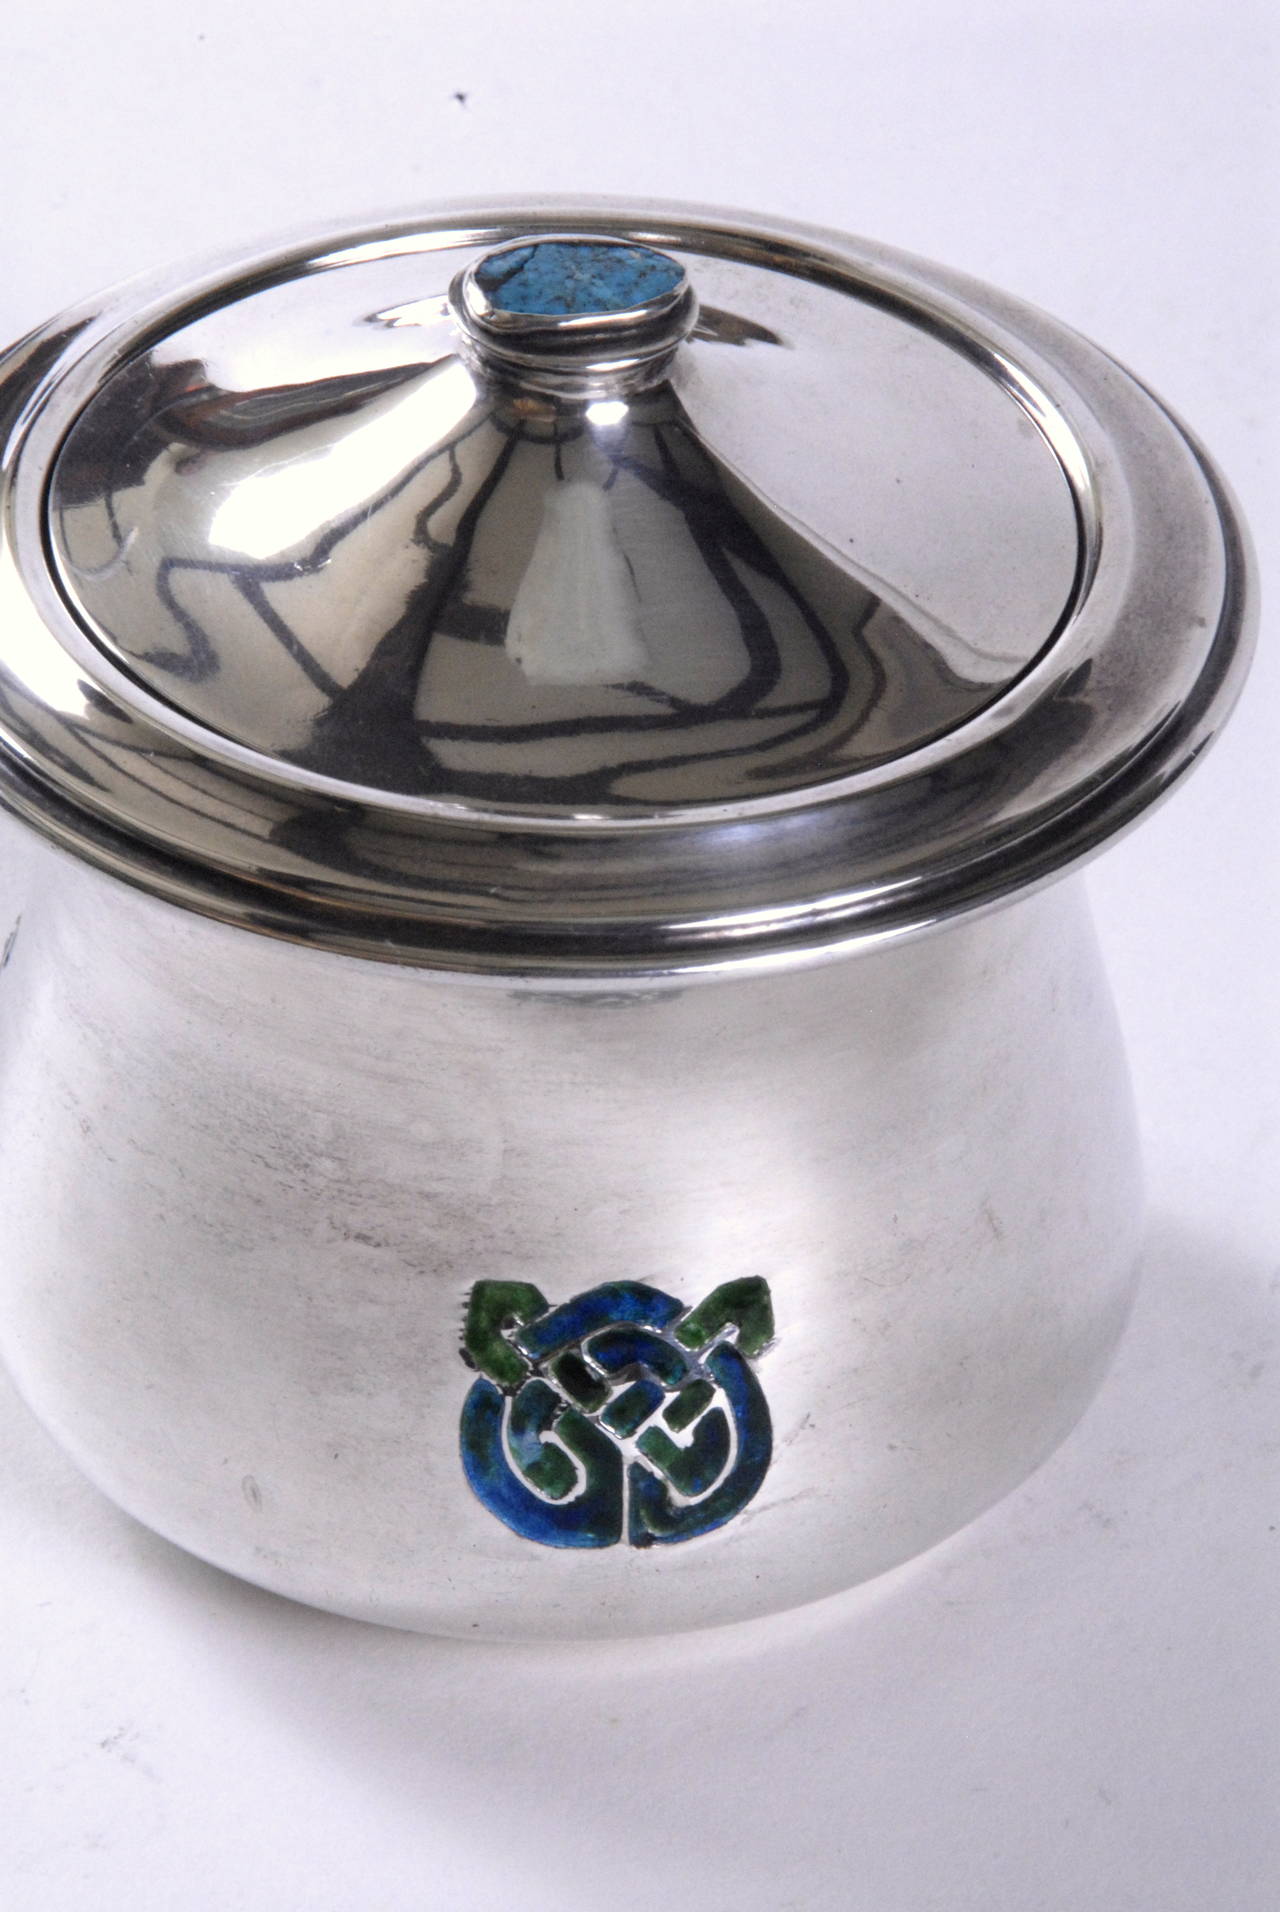 A silver covered bowl by Liberty, London designed by Archibald Knox. Hall marked underneath for L&Co Birmingham, 1902. CYMRIC.
The waisted body has 3 blue/green enamelled Celtic designs spaced around it and the lid knop is fitted with a piece of